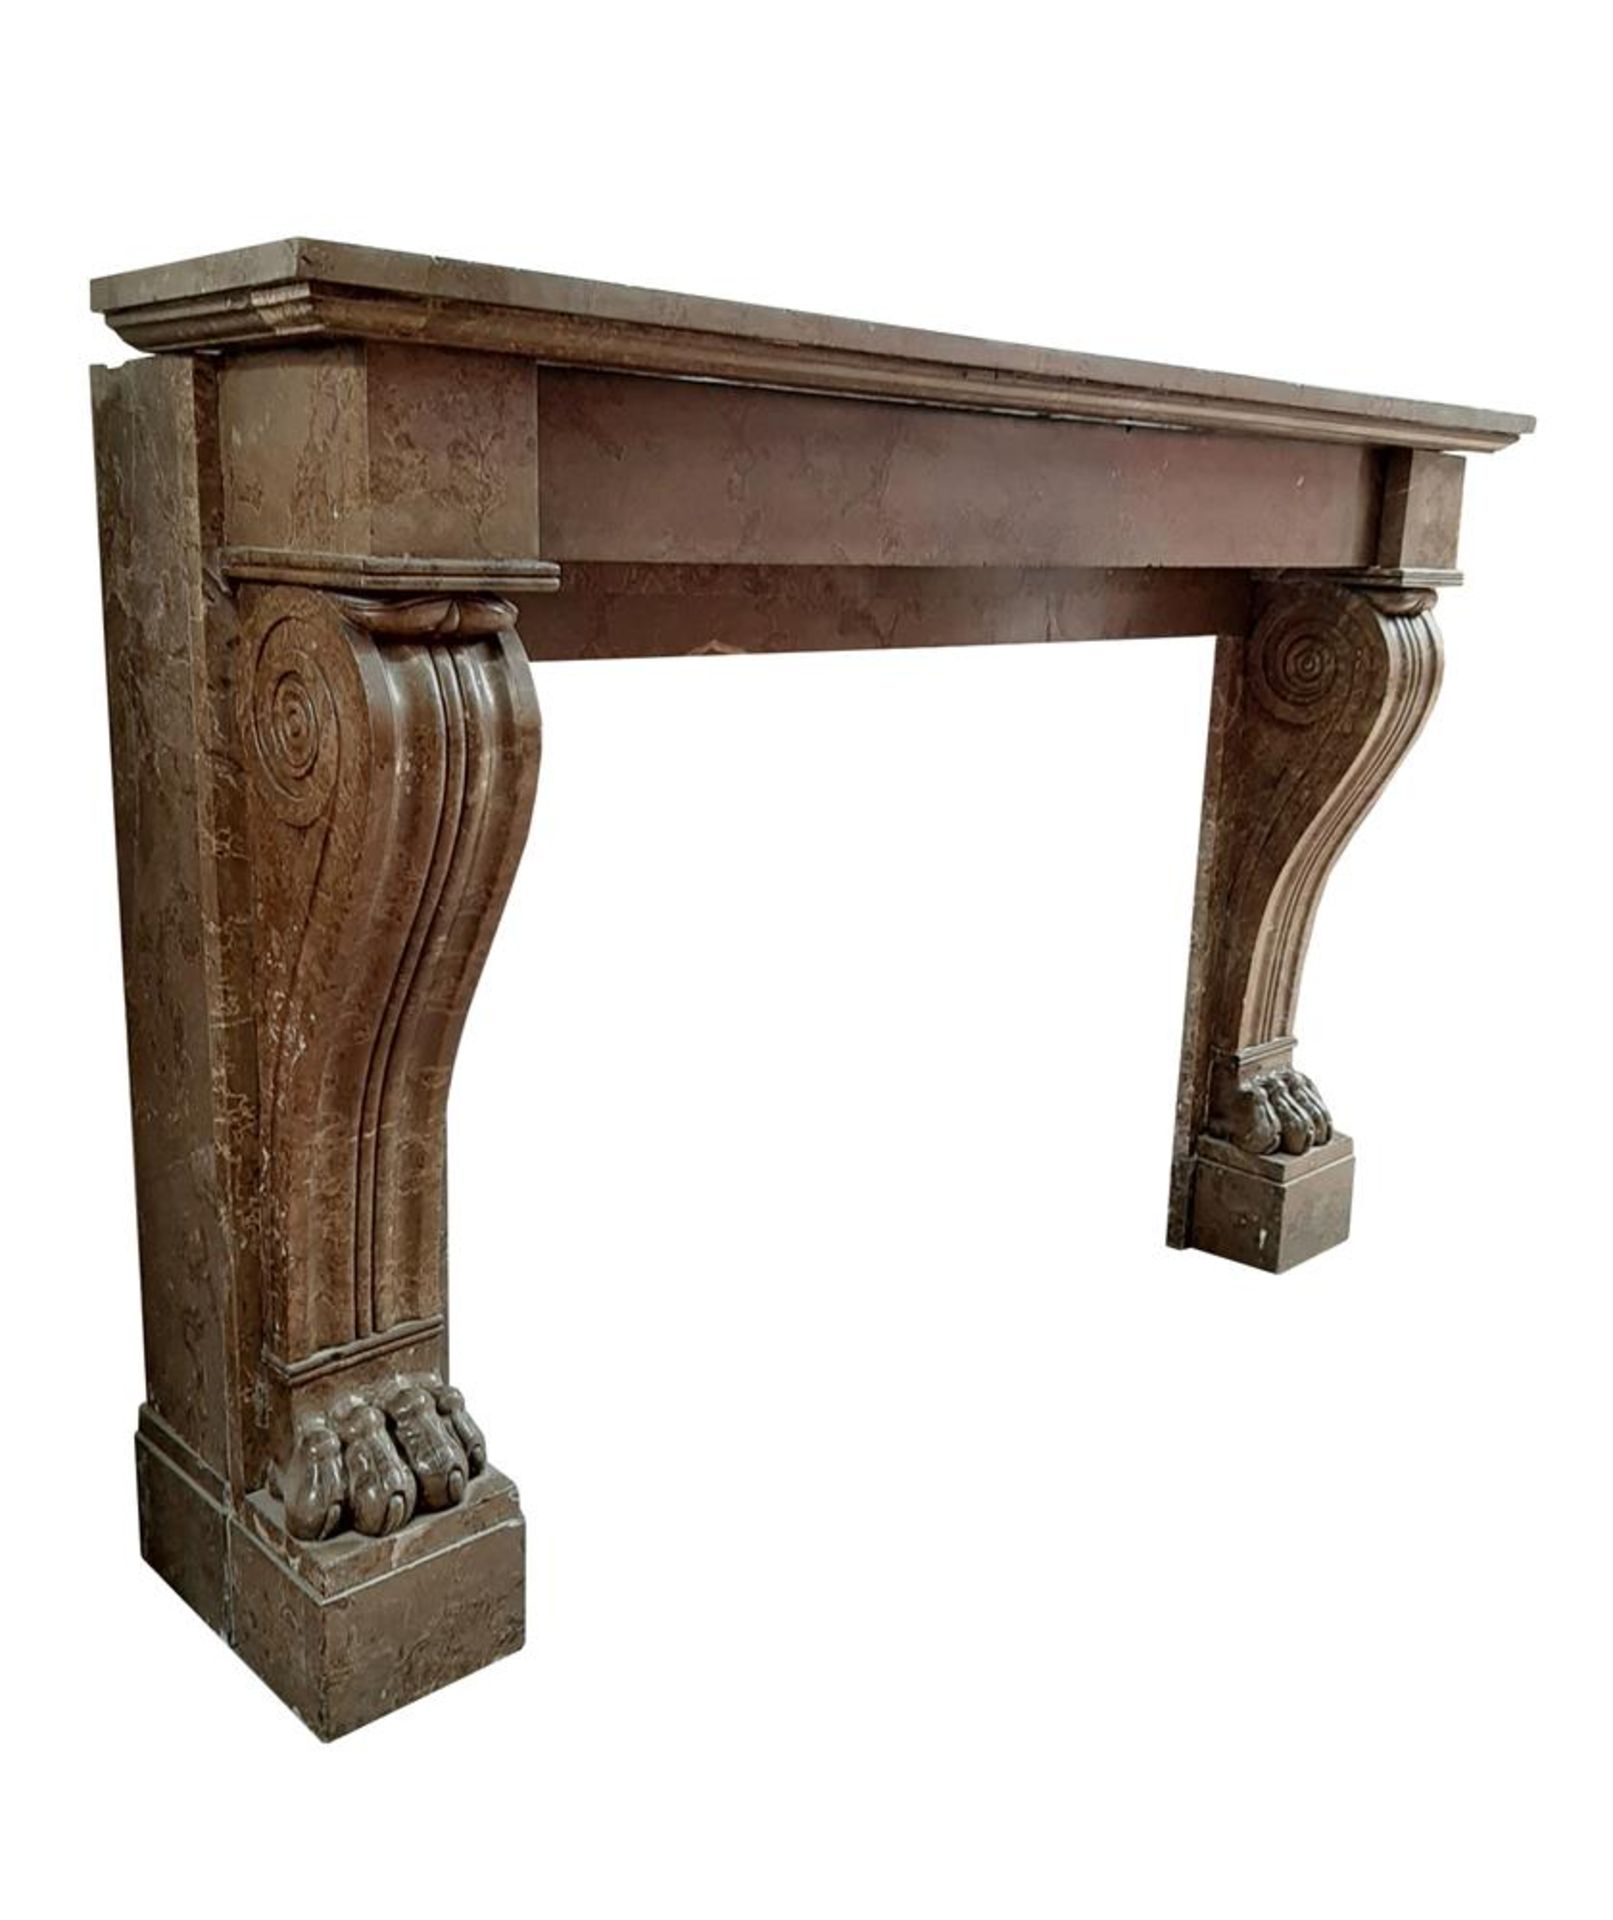 ‡ A FRENCH VARIEGATED BROWN MARBLE FIRE SURROUND